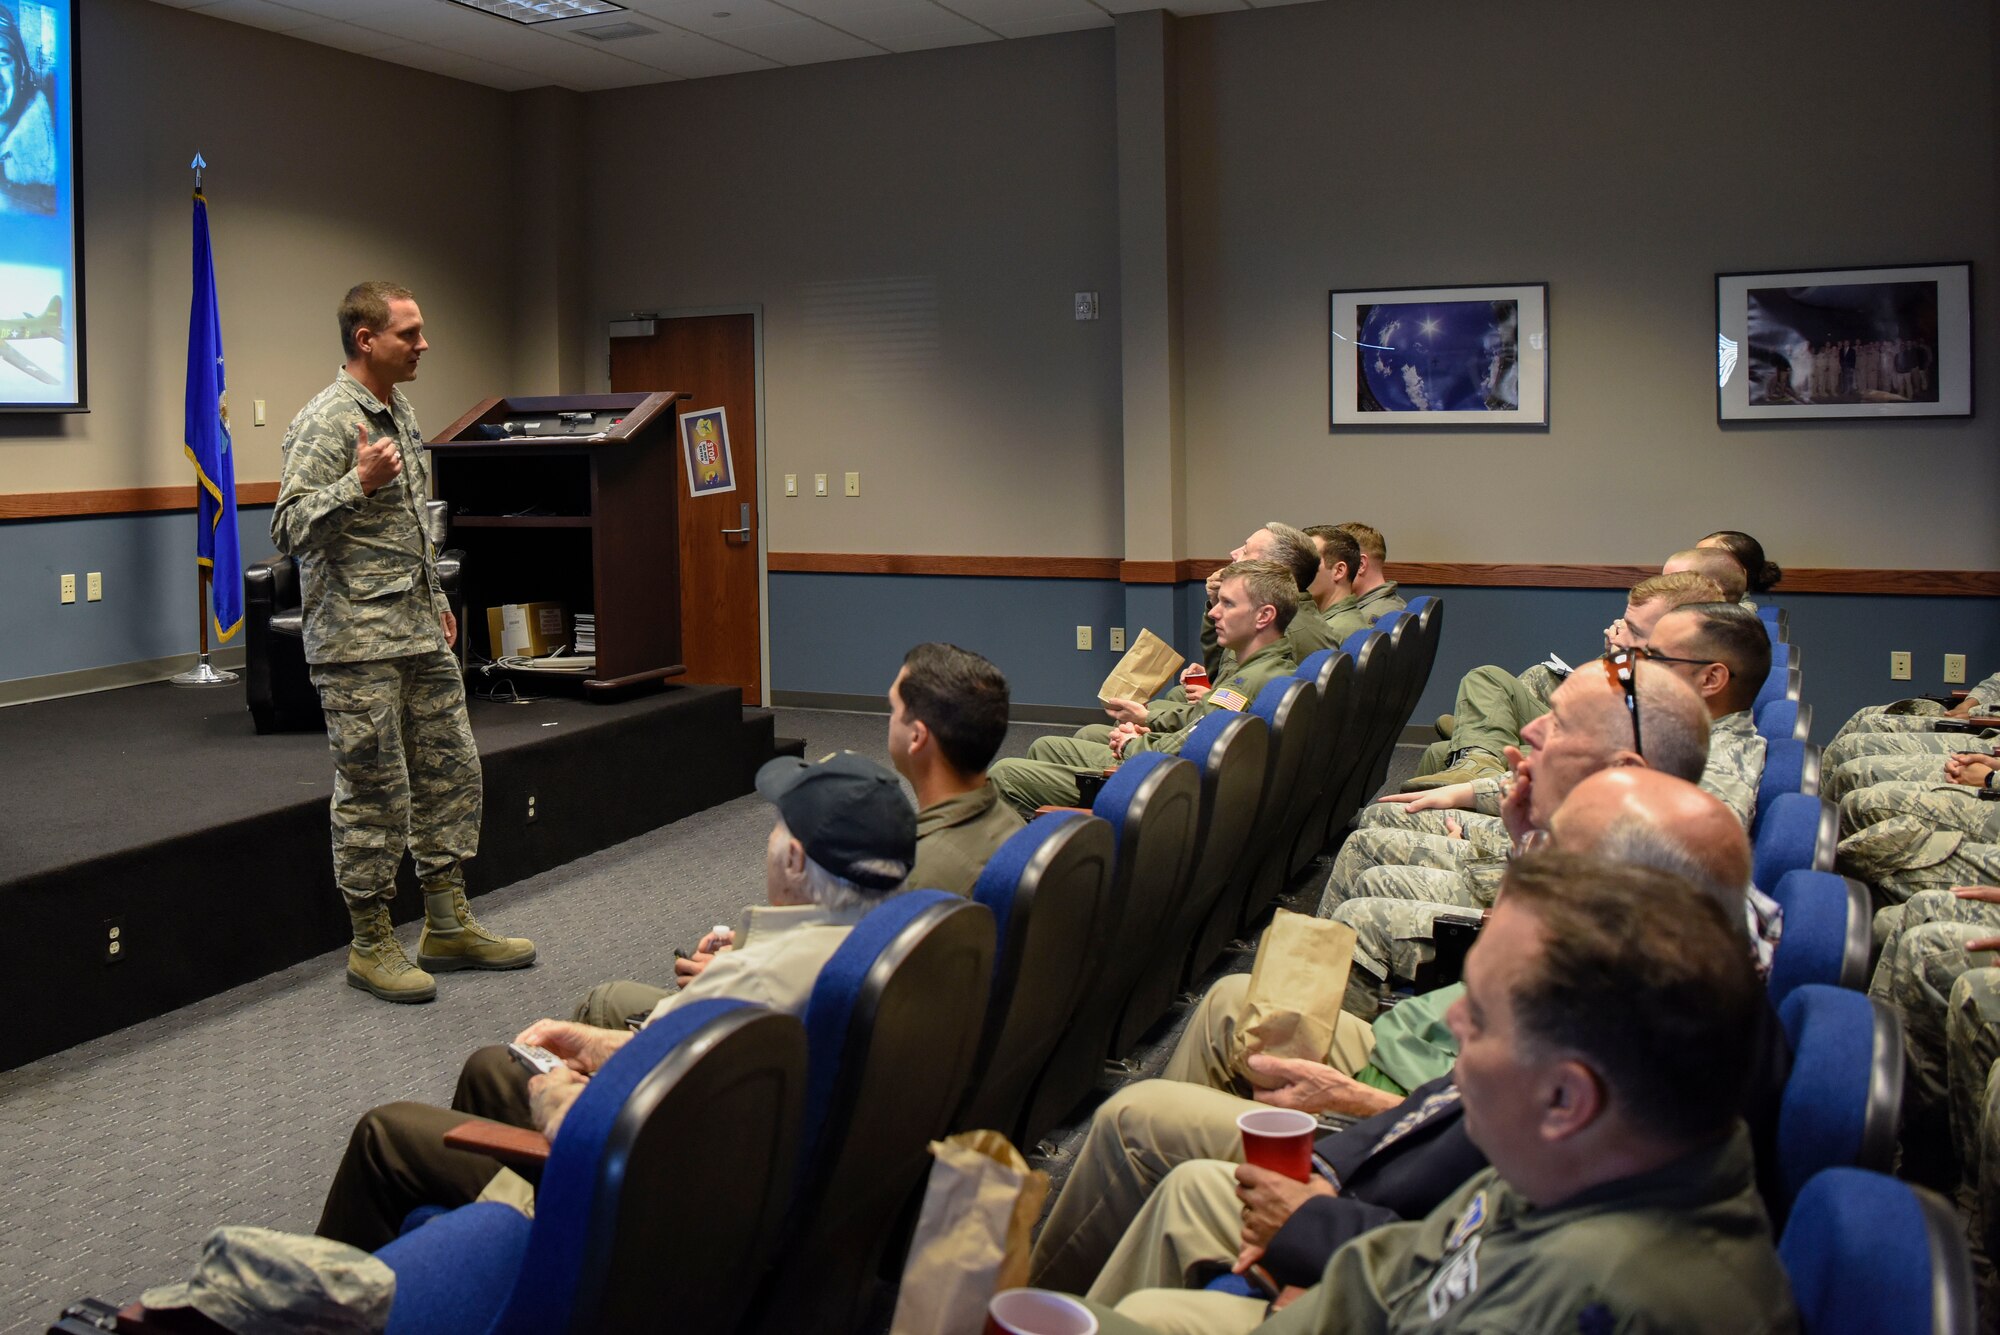 Col. Ethan Griffin, 436th Airlift Wing commander, gives the opening remarks at the quarterly Hangar Talk May 10, 2018, at Dover Air Force Base, Del. This was Griffin’s last heritage event before his change of command. (U.S. Air Force photo by Airman 1st Class Zoe M. Wockenfuss)